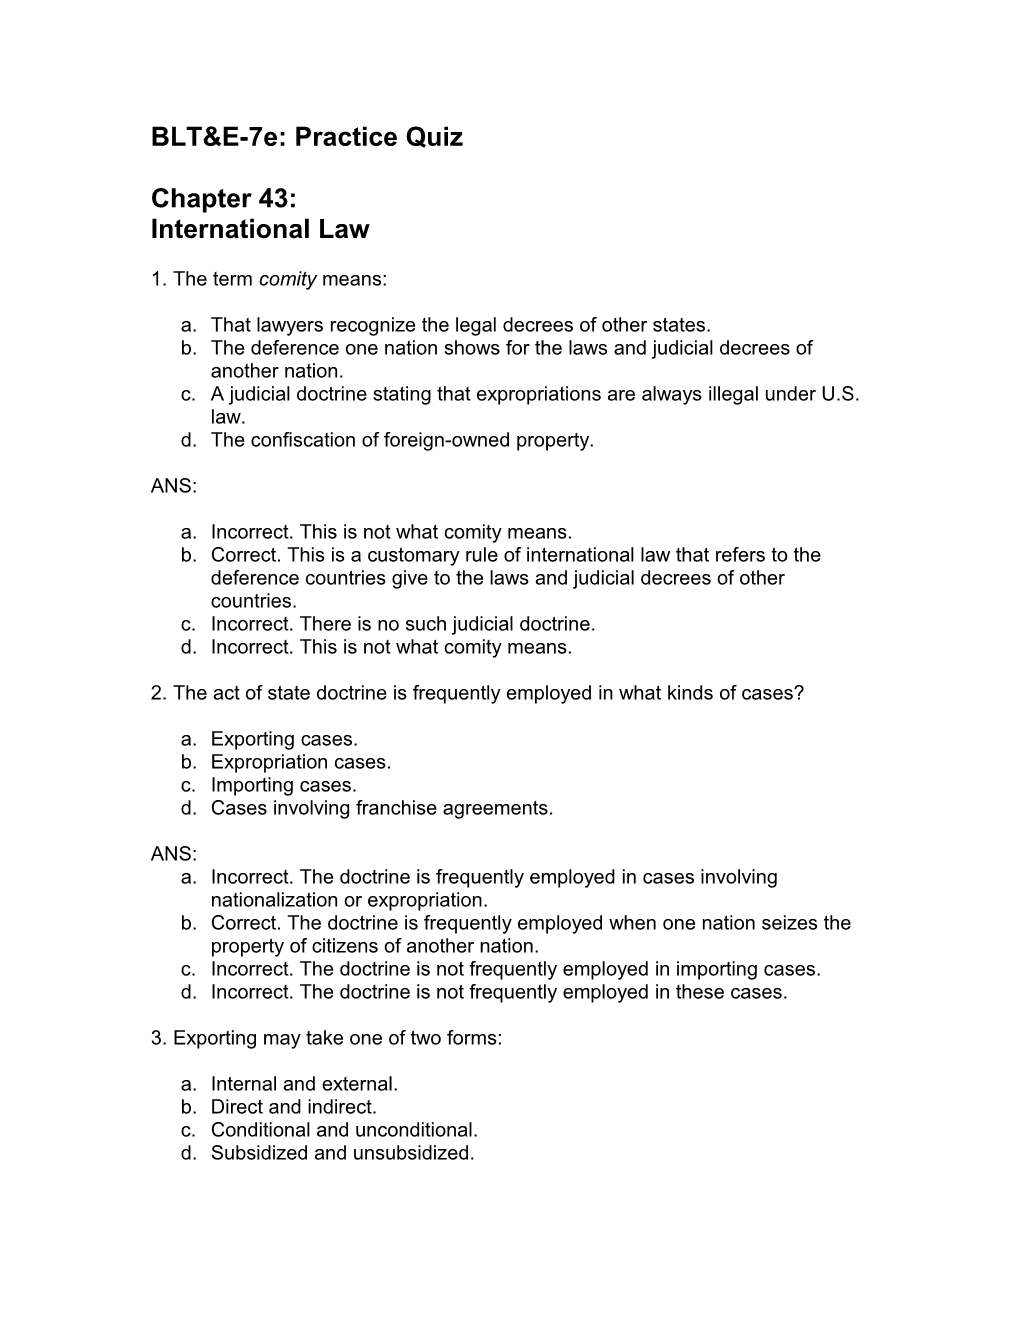 Online Quizzes and Answers for Business Law Today, Seventh Edition s4